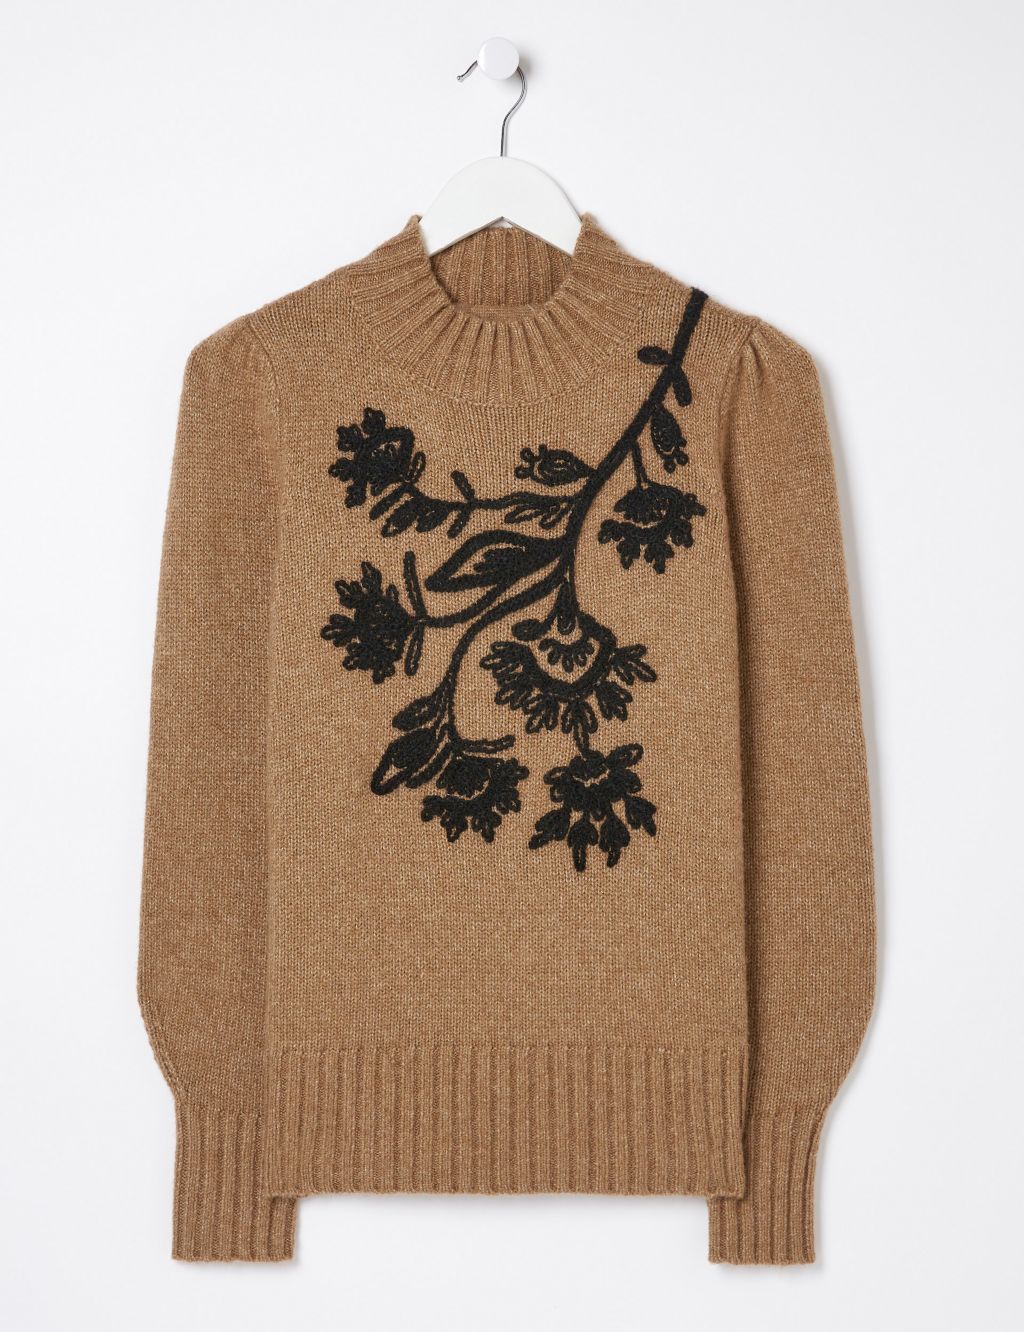 Embroidered Funnel Neck Jumper with Cotton image 2